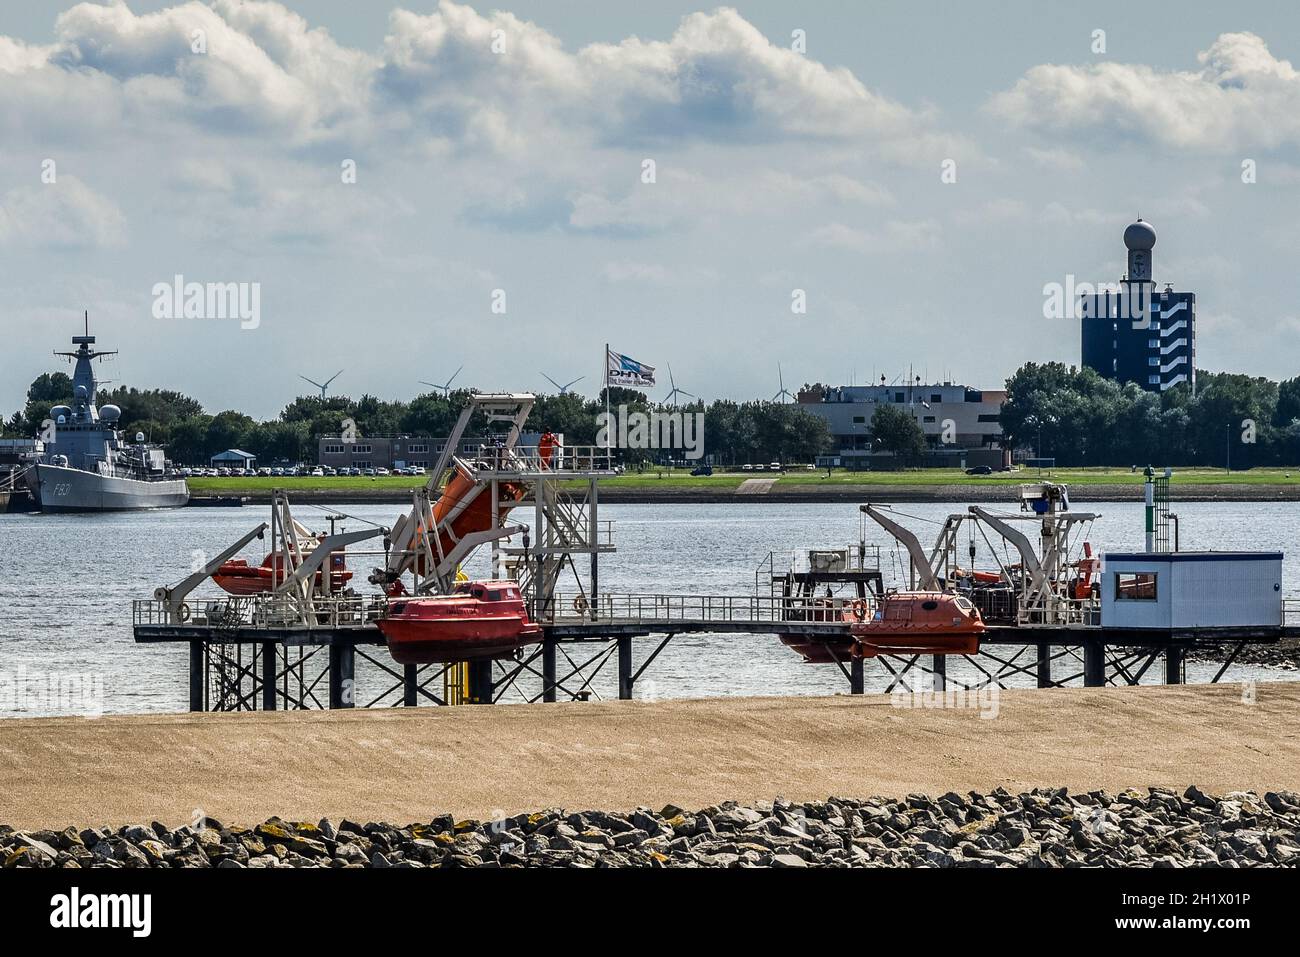 Den Helder, the Netherlands. September 2021. Training facility for rescue crafts and life boats in the harbor of Den Helder. High quality photo. Stock Photo